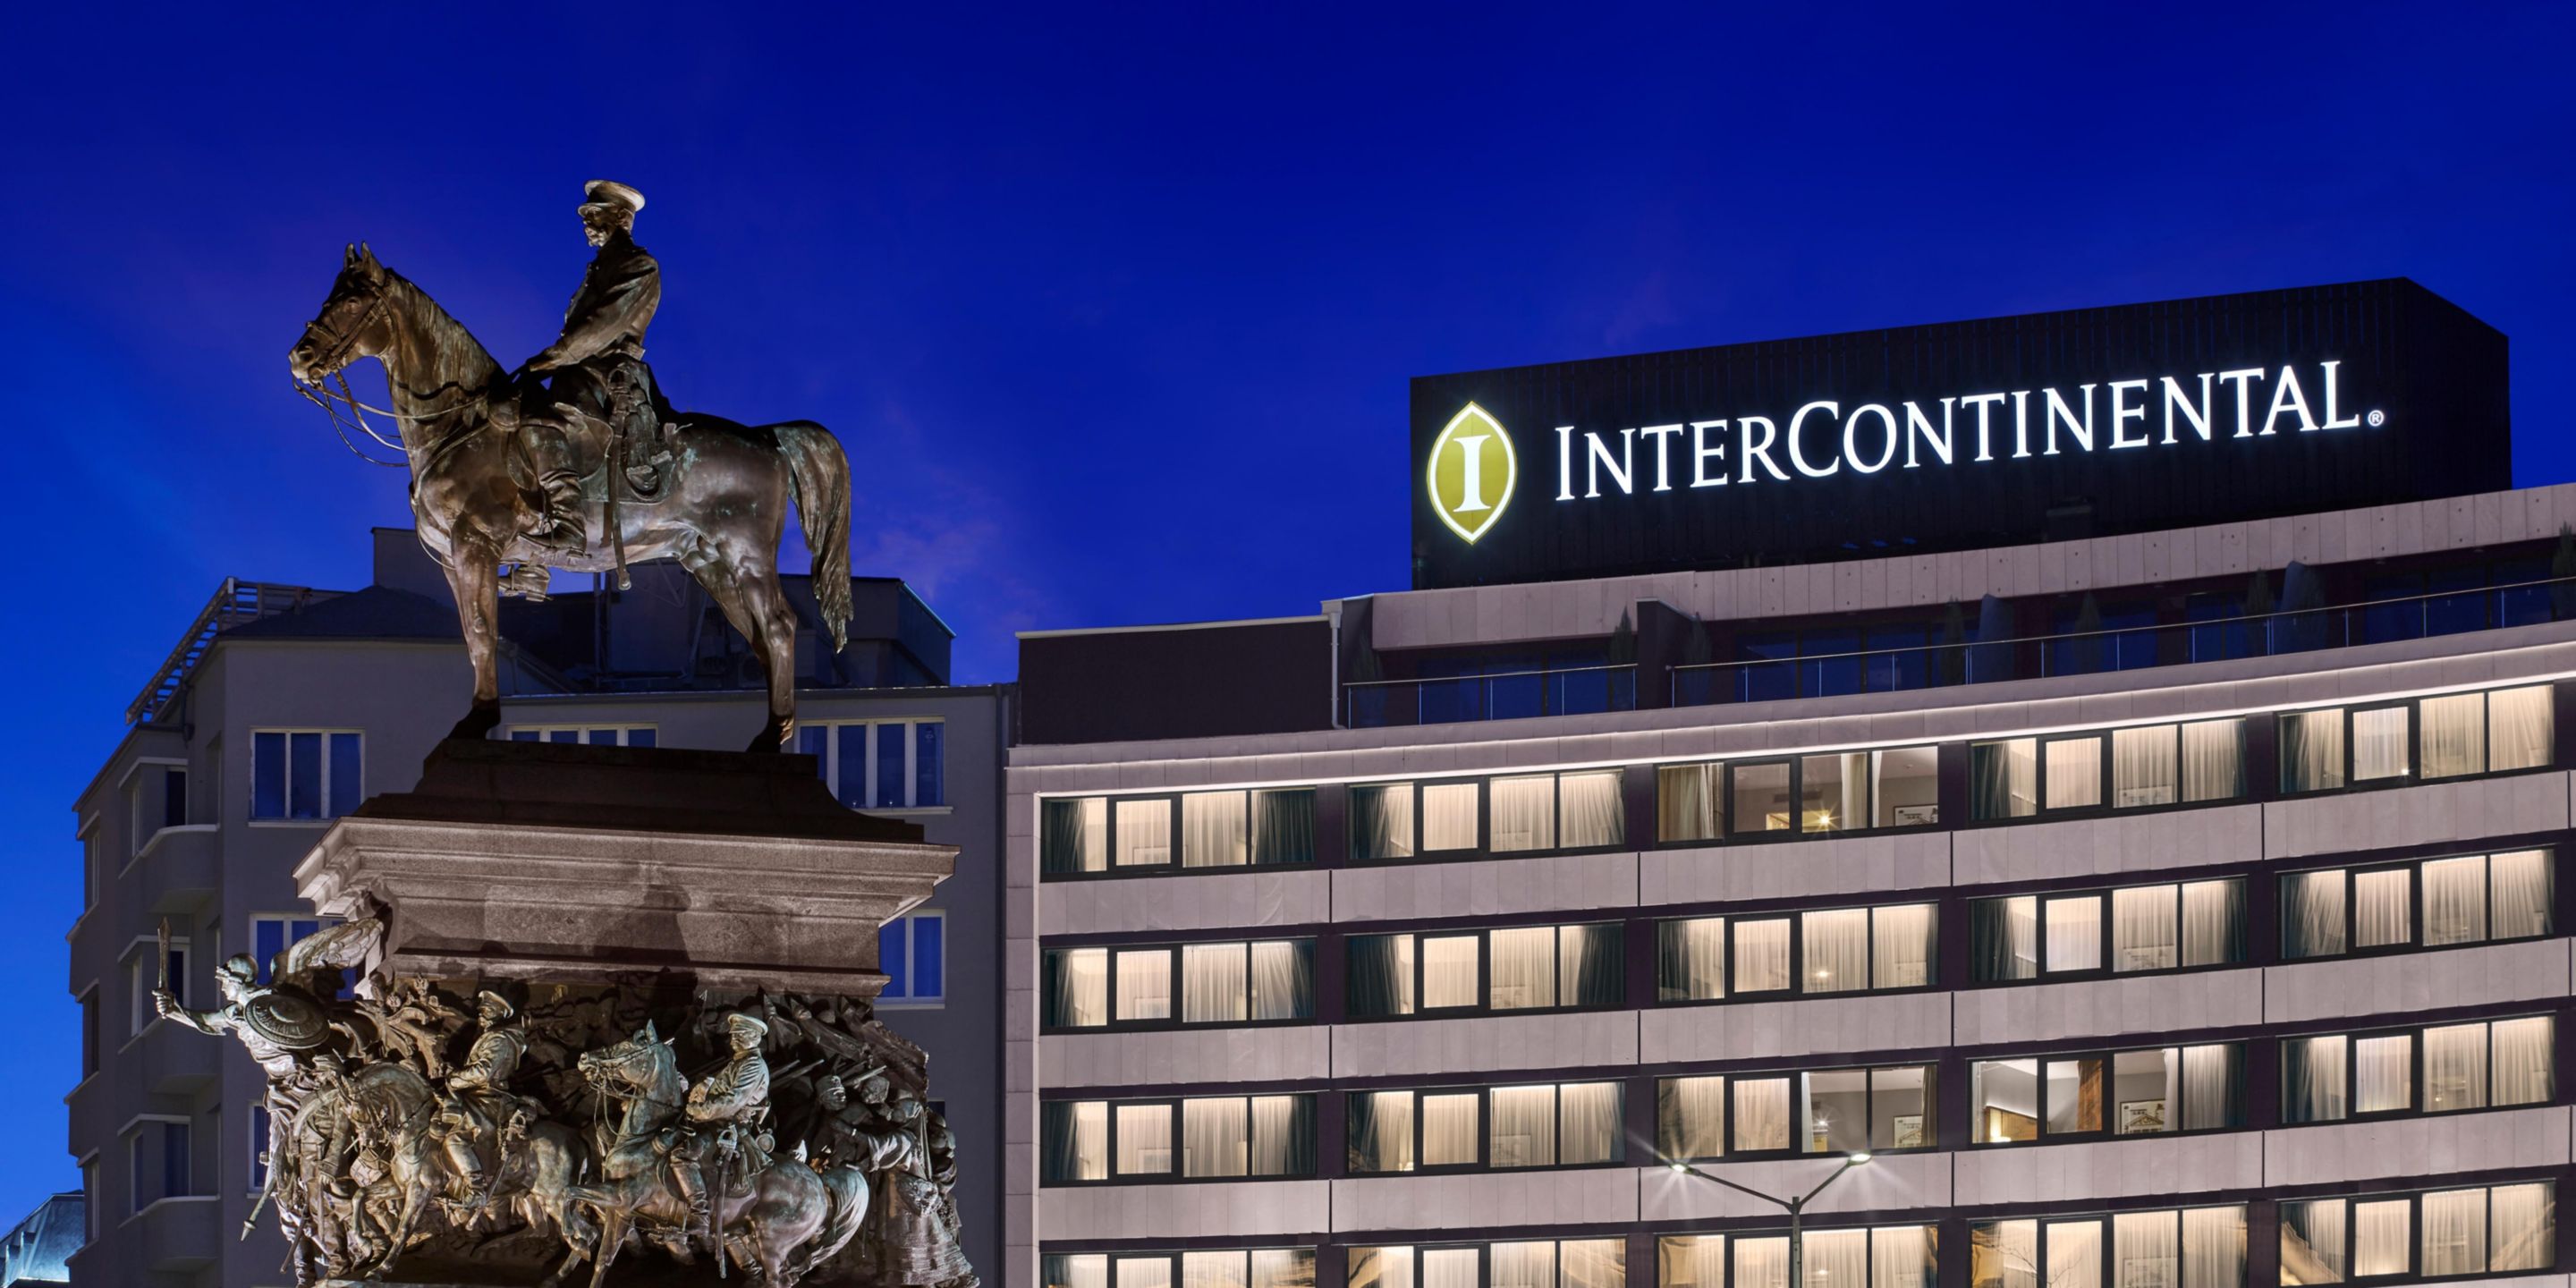 InterContinental Hotels Group has opened Bulgarias first InterContinental Hotels  Resorts property in the capital city of S